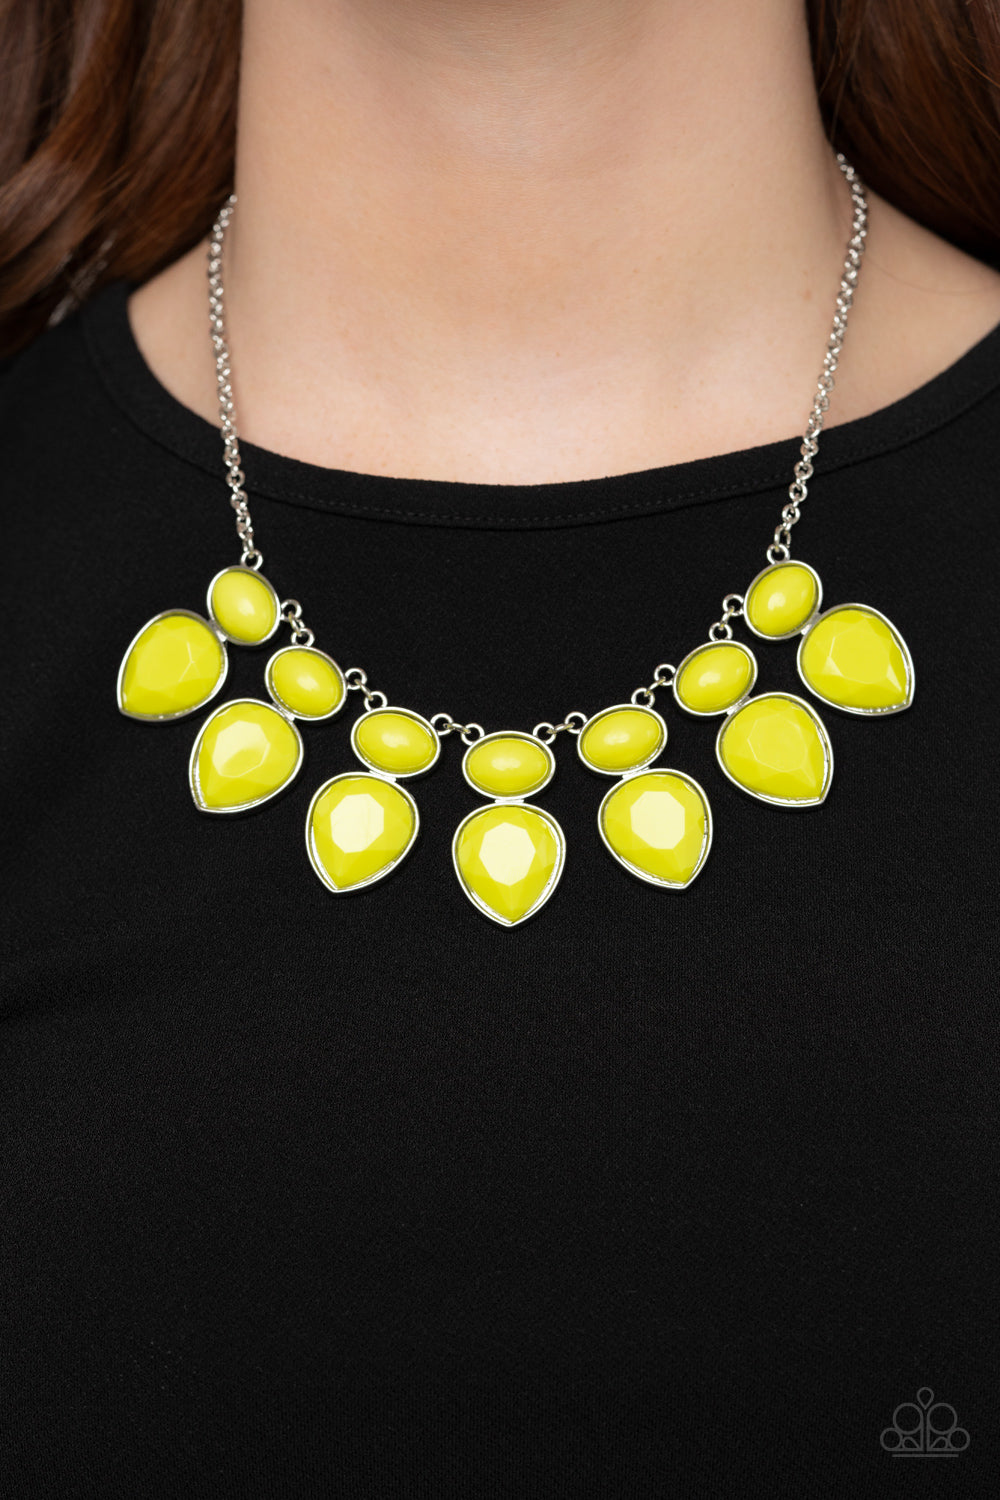 Paparazzi Jewelry & Accessories - Modern Masquerade - Yellow Necklace. Bling By Titia Boutique